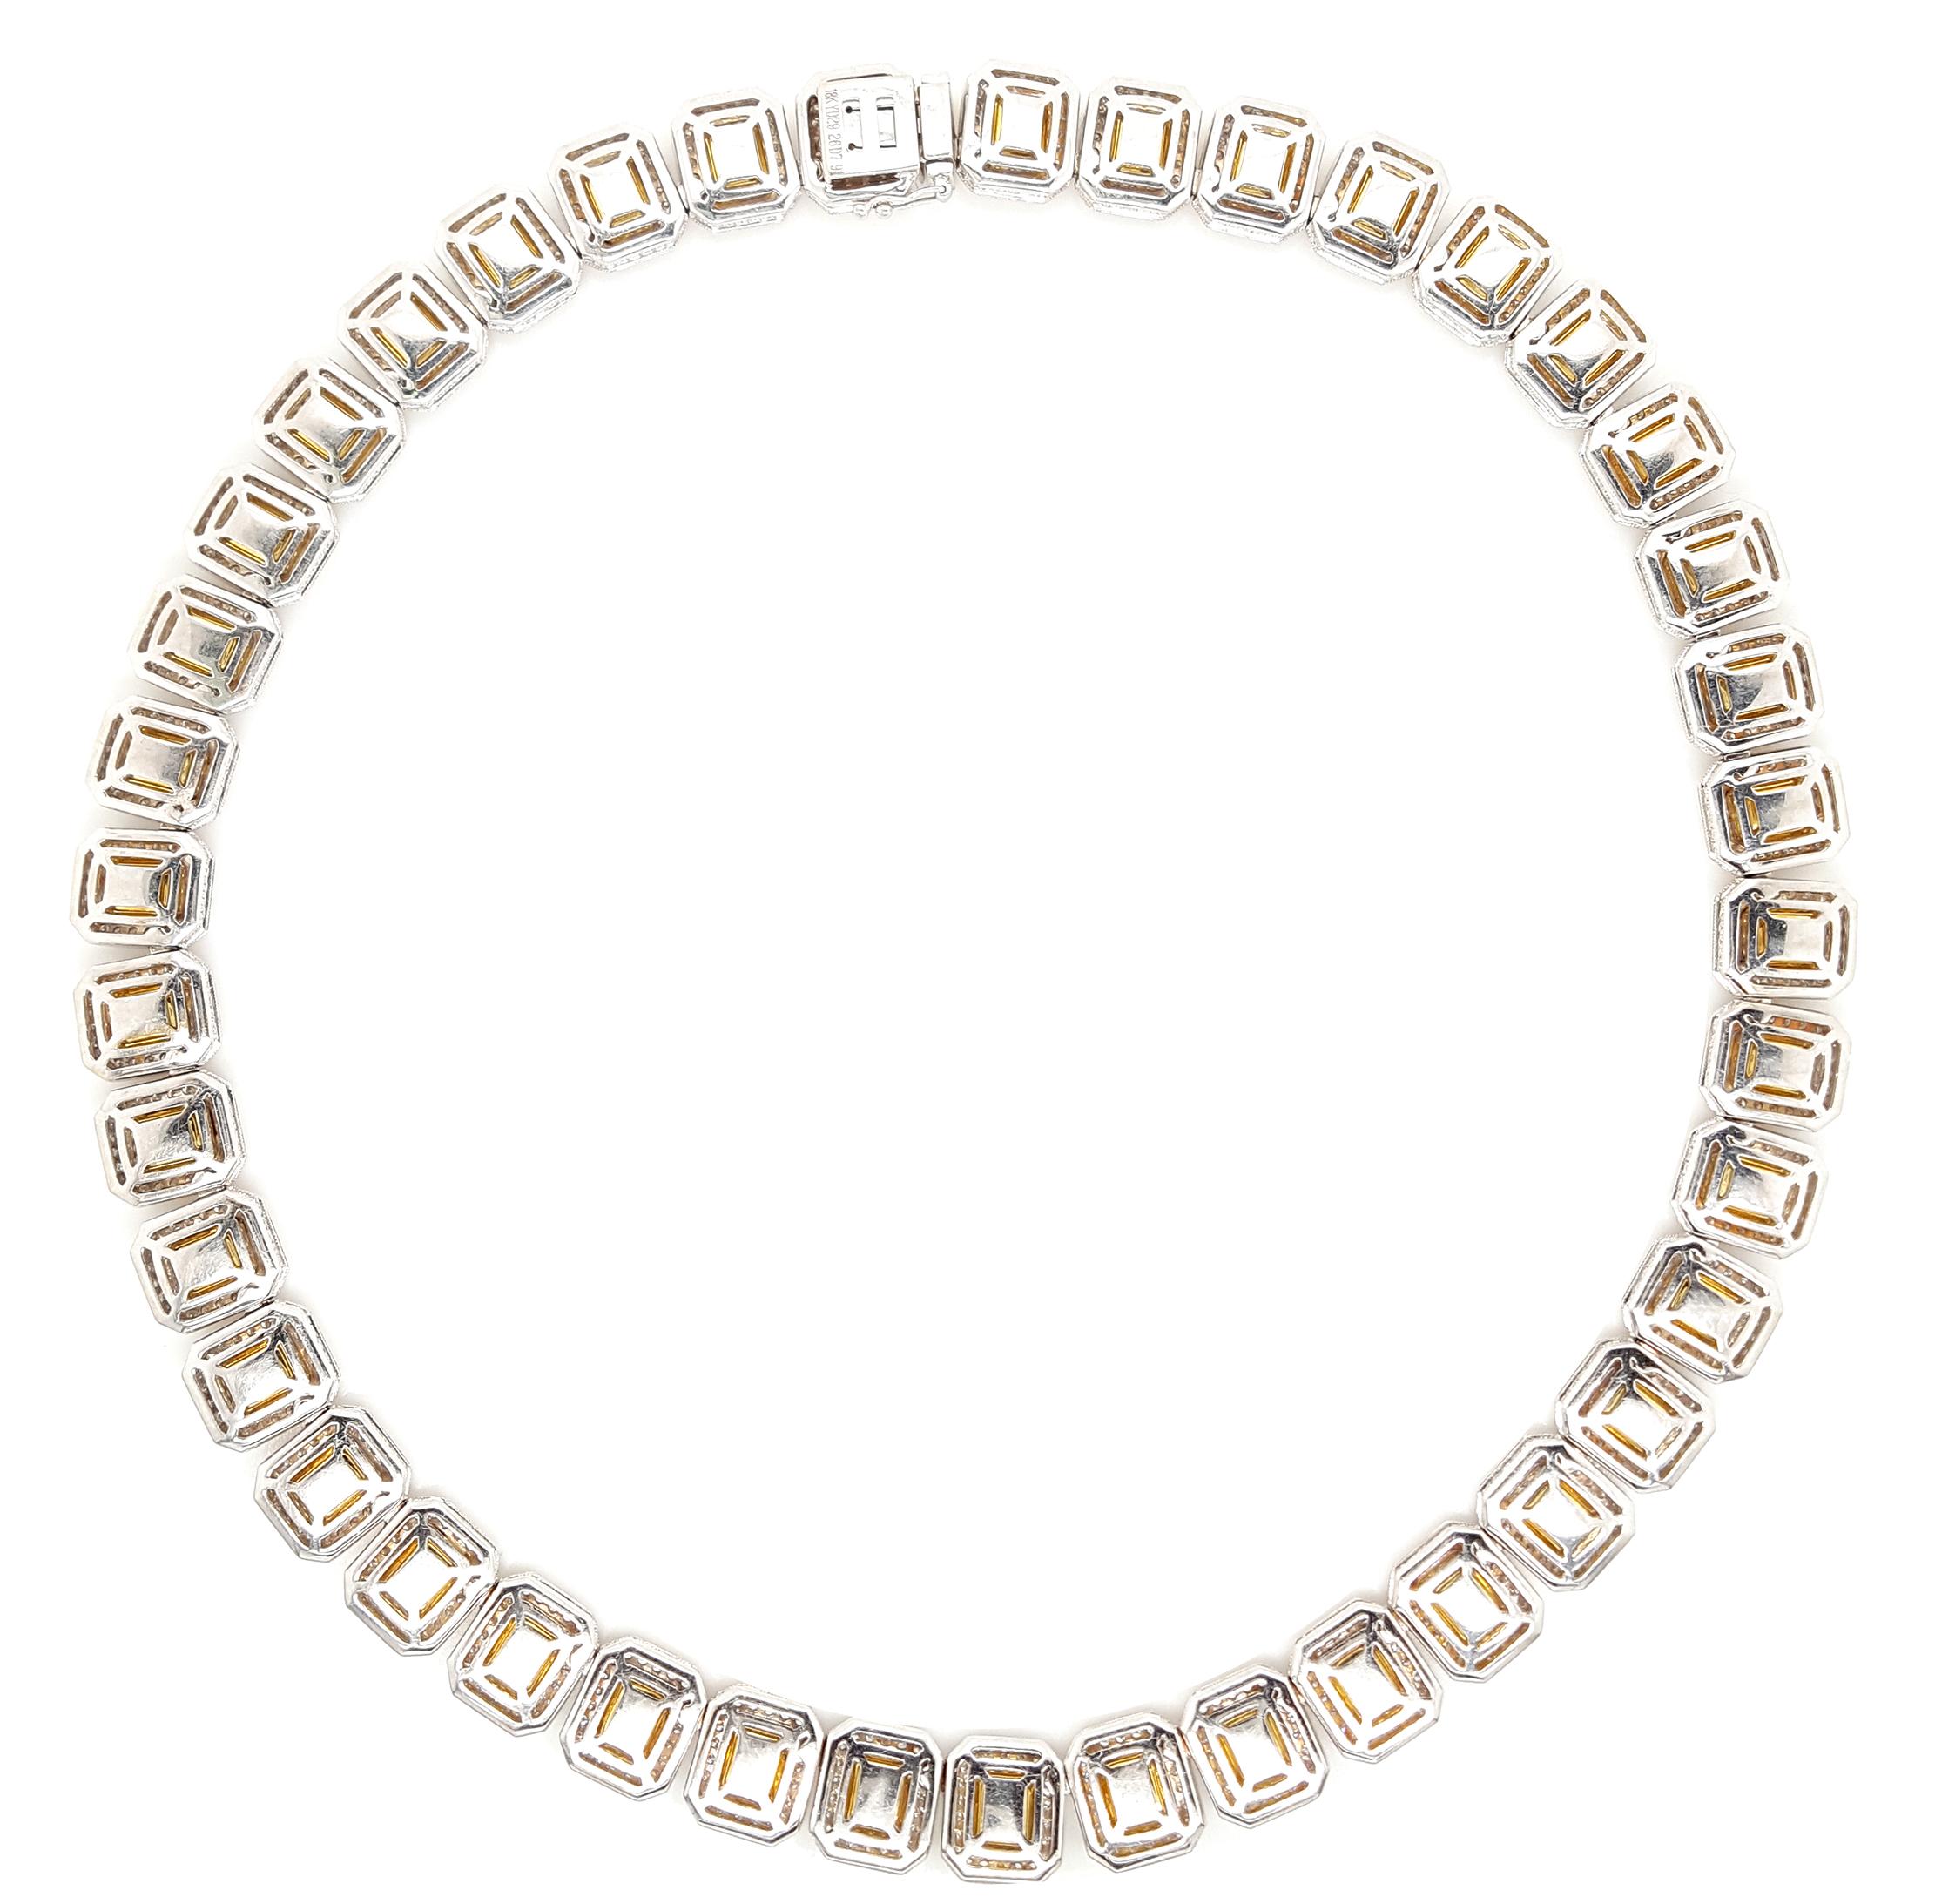 Contemporary 37 Carat Yellow and White Diamond Halo Eternity Necklace, Set in 18k Gold For Sale